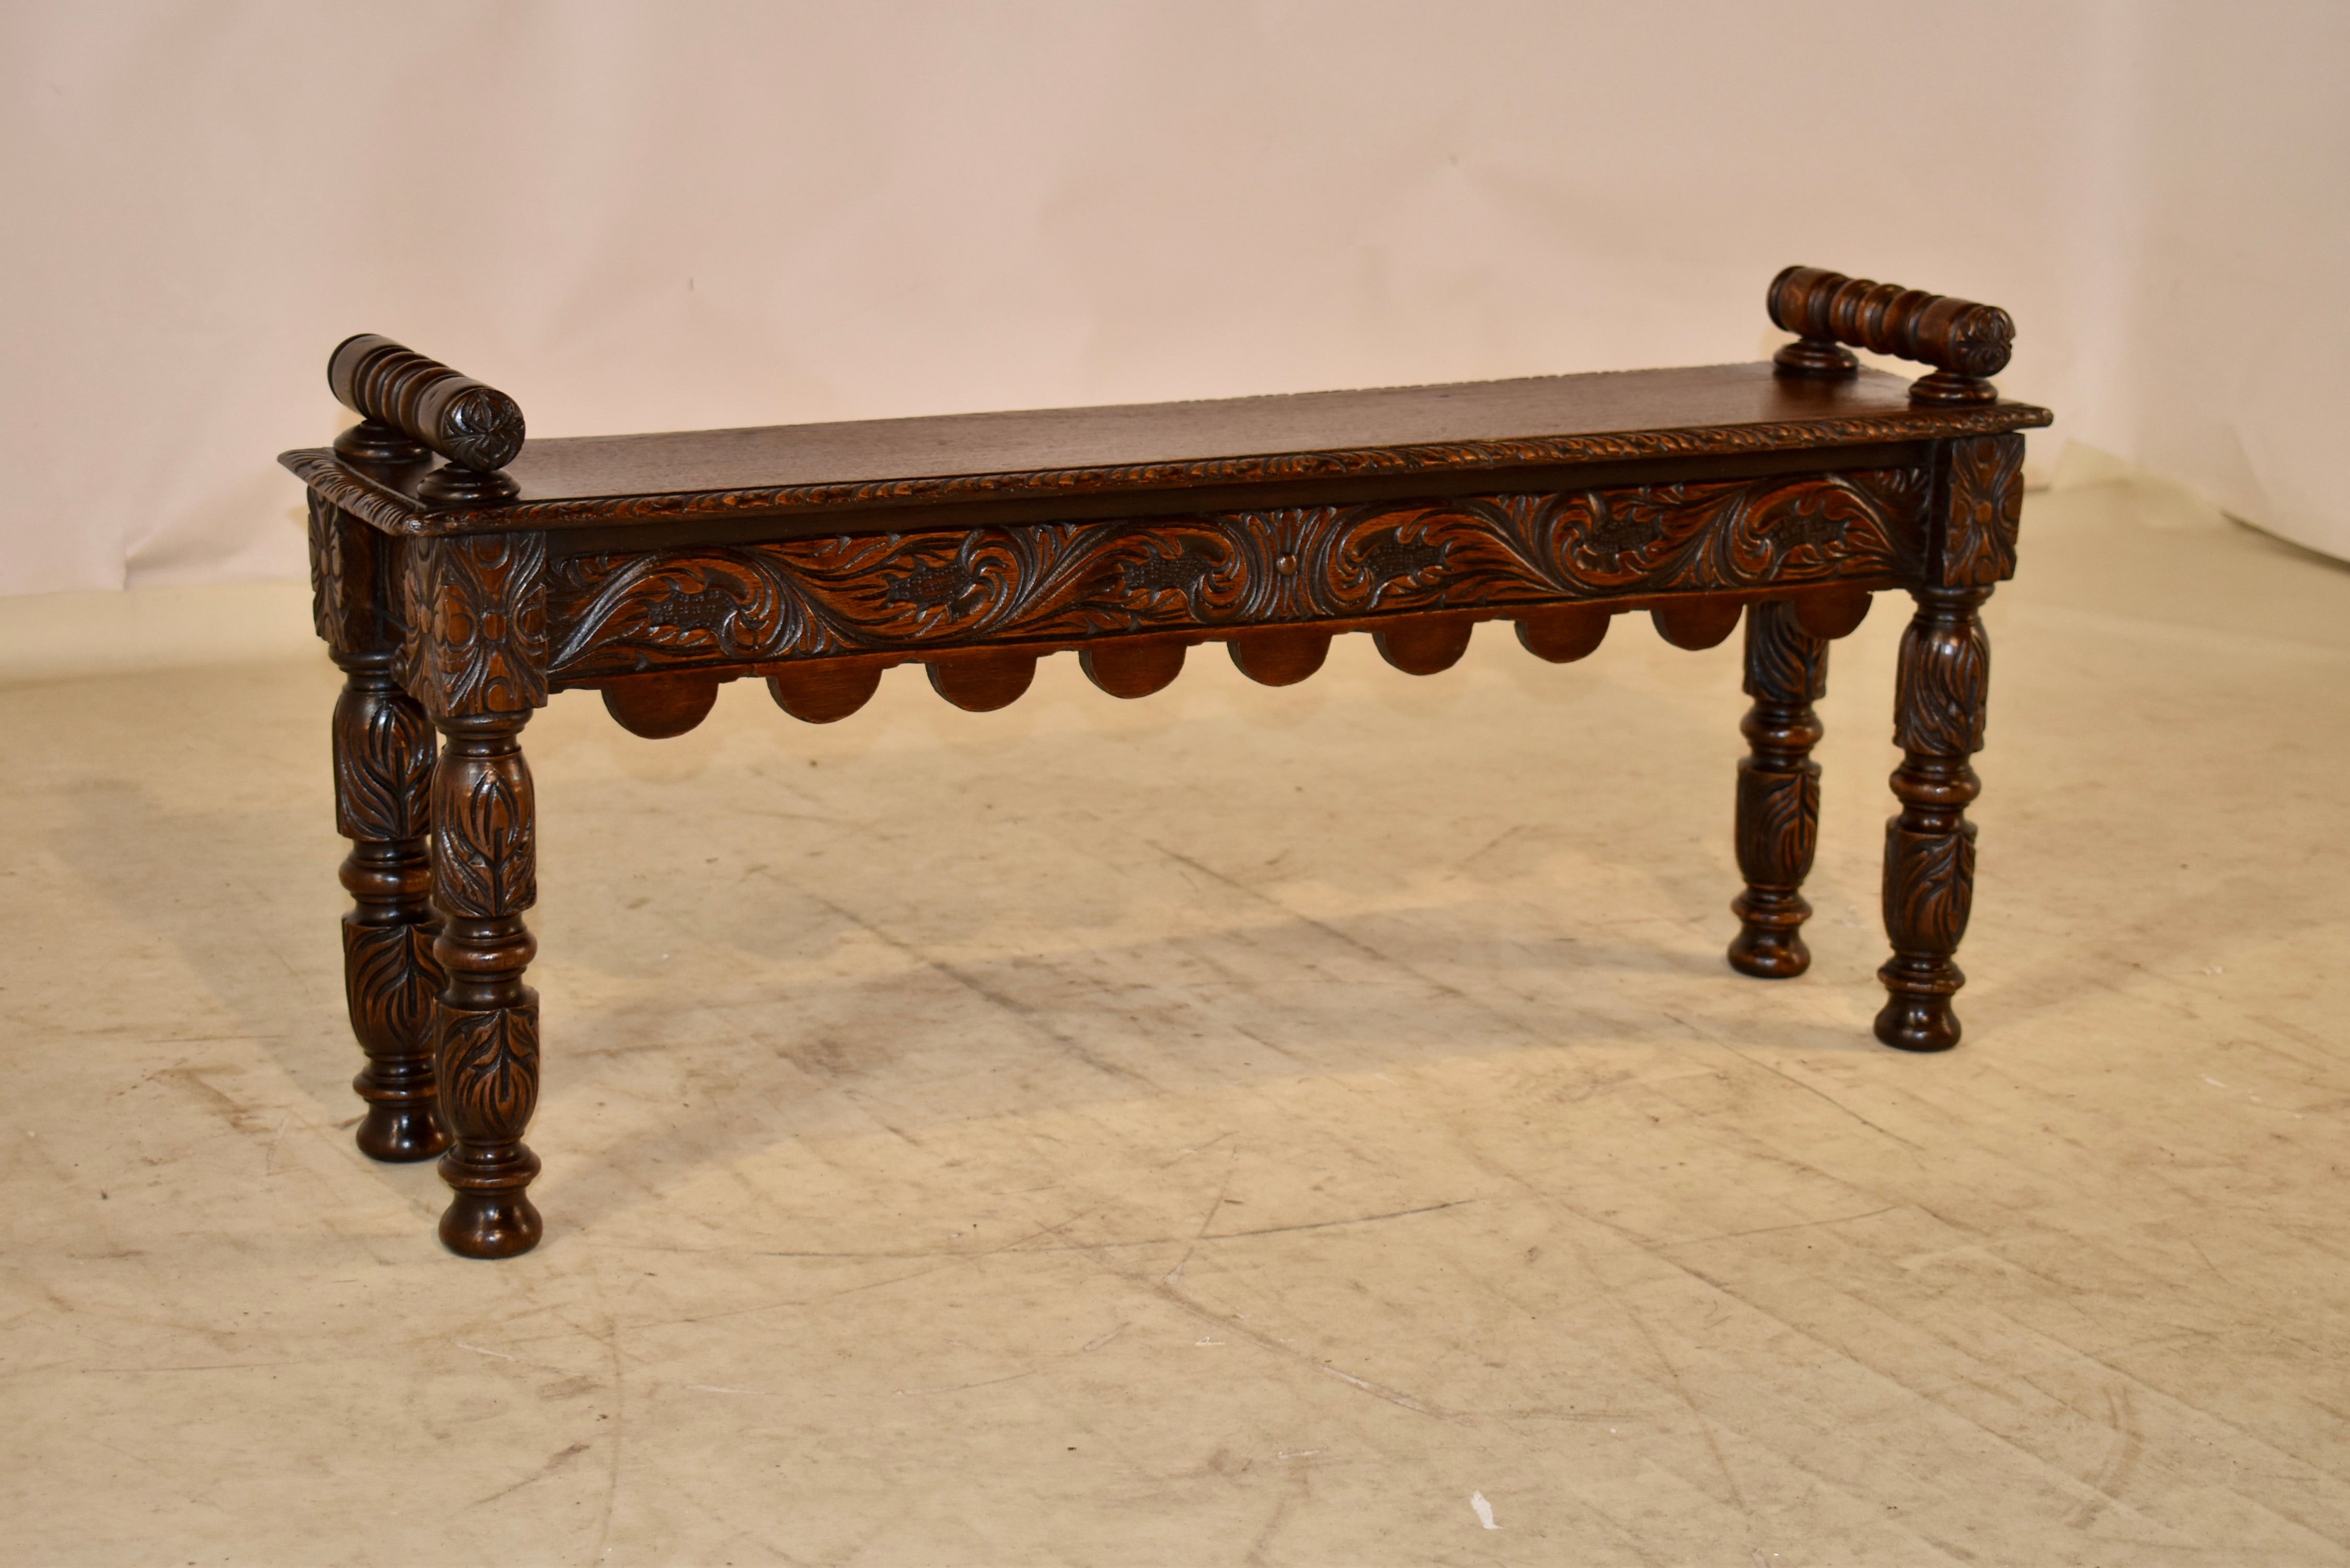 19th Century oak window seat from England. This piece has lovely hand carved decorated arms attached to the seat, which is made from a single board. The seat has a beveled and hand carved decorated edge, and follows down to a lovely apron, which is